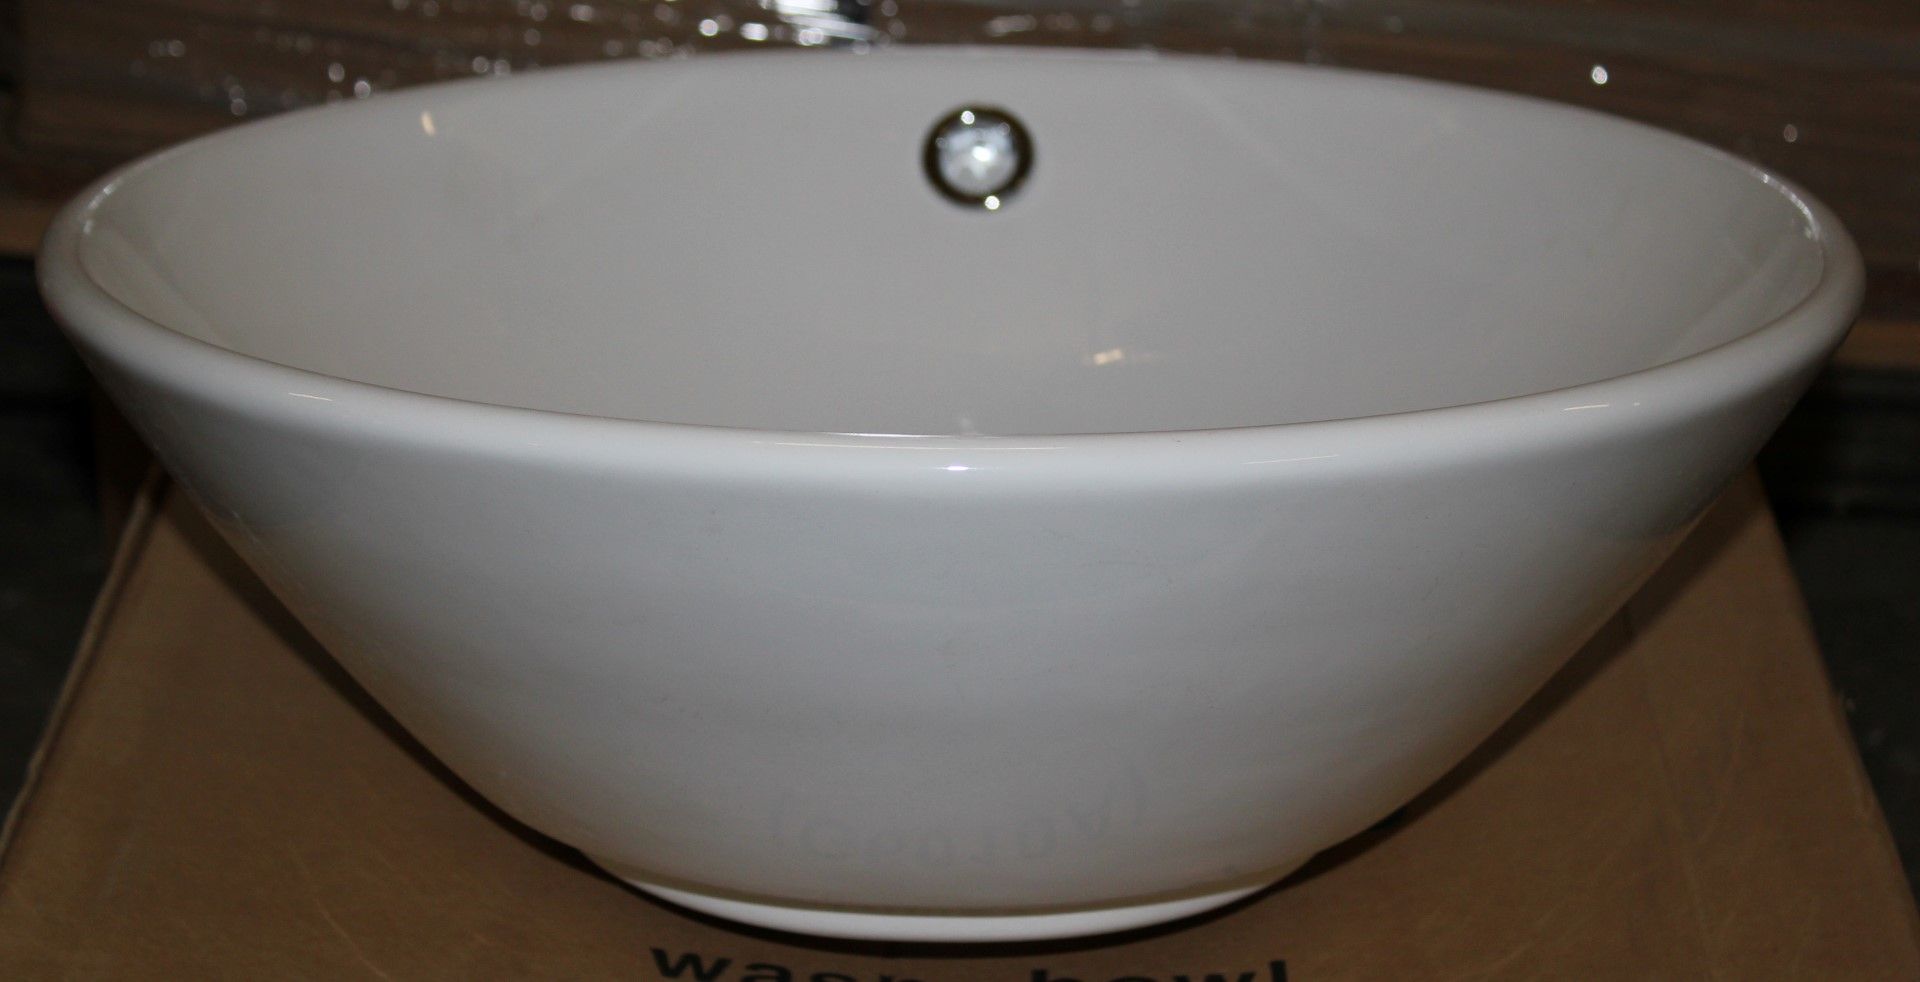 1 x Vogue Bathrooms Round VANITY Counter Top WASH BOWL - Ideal For Pubs, Restaurants, Hotels, - Image 3 of 4